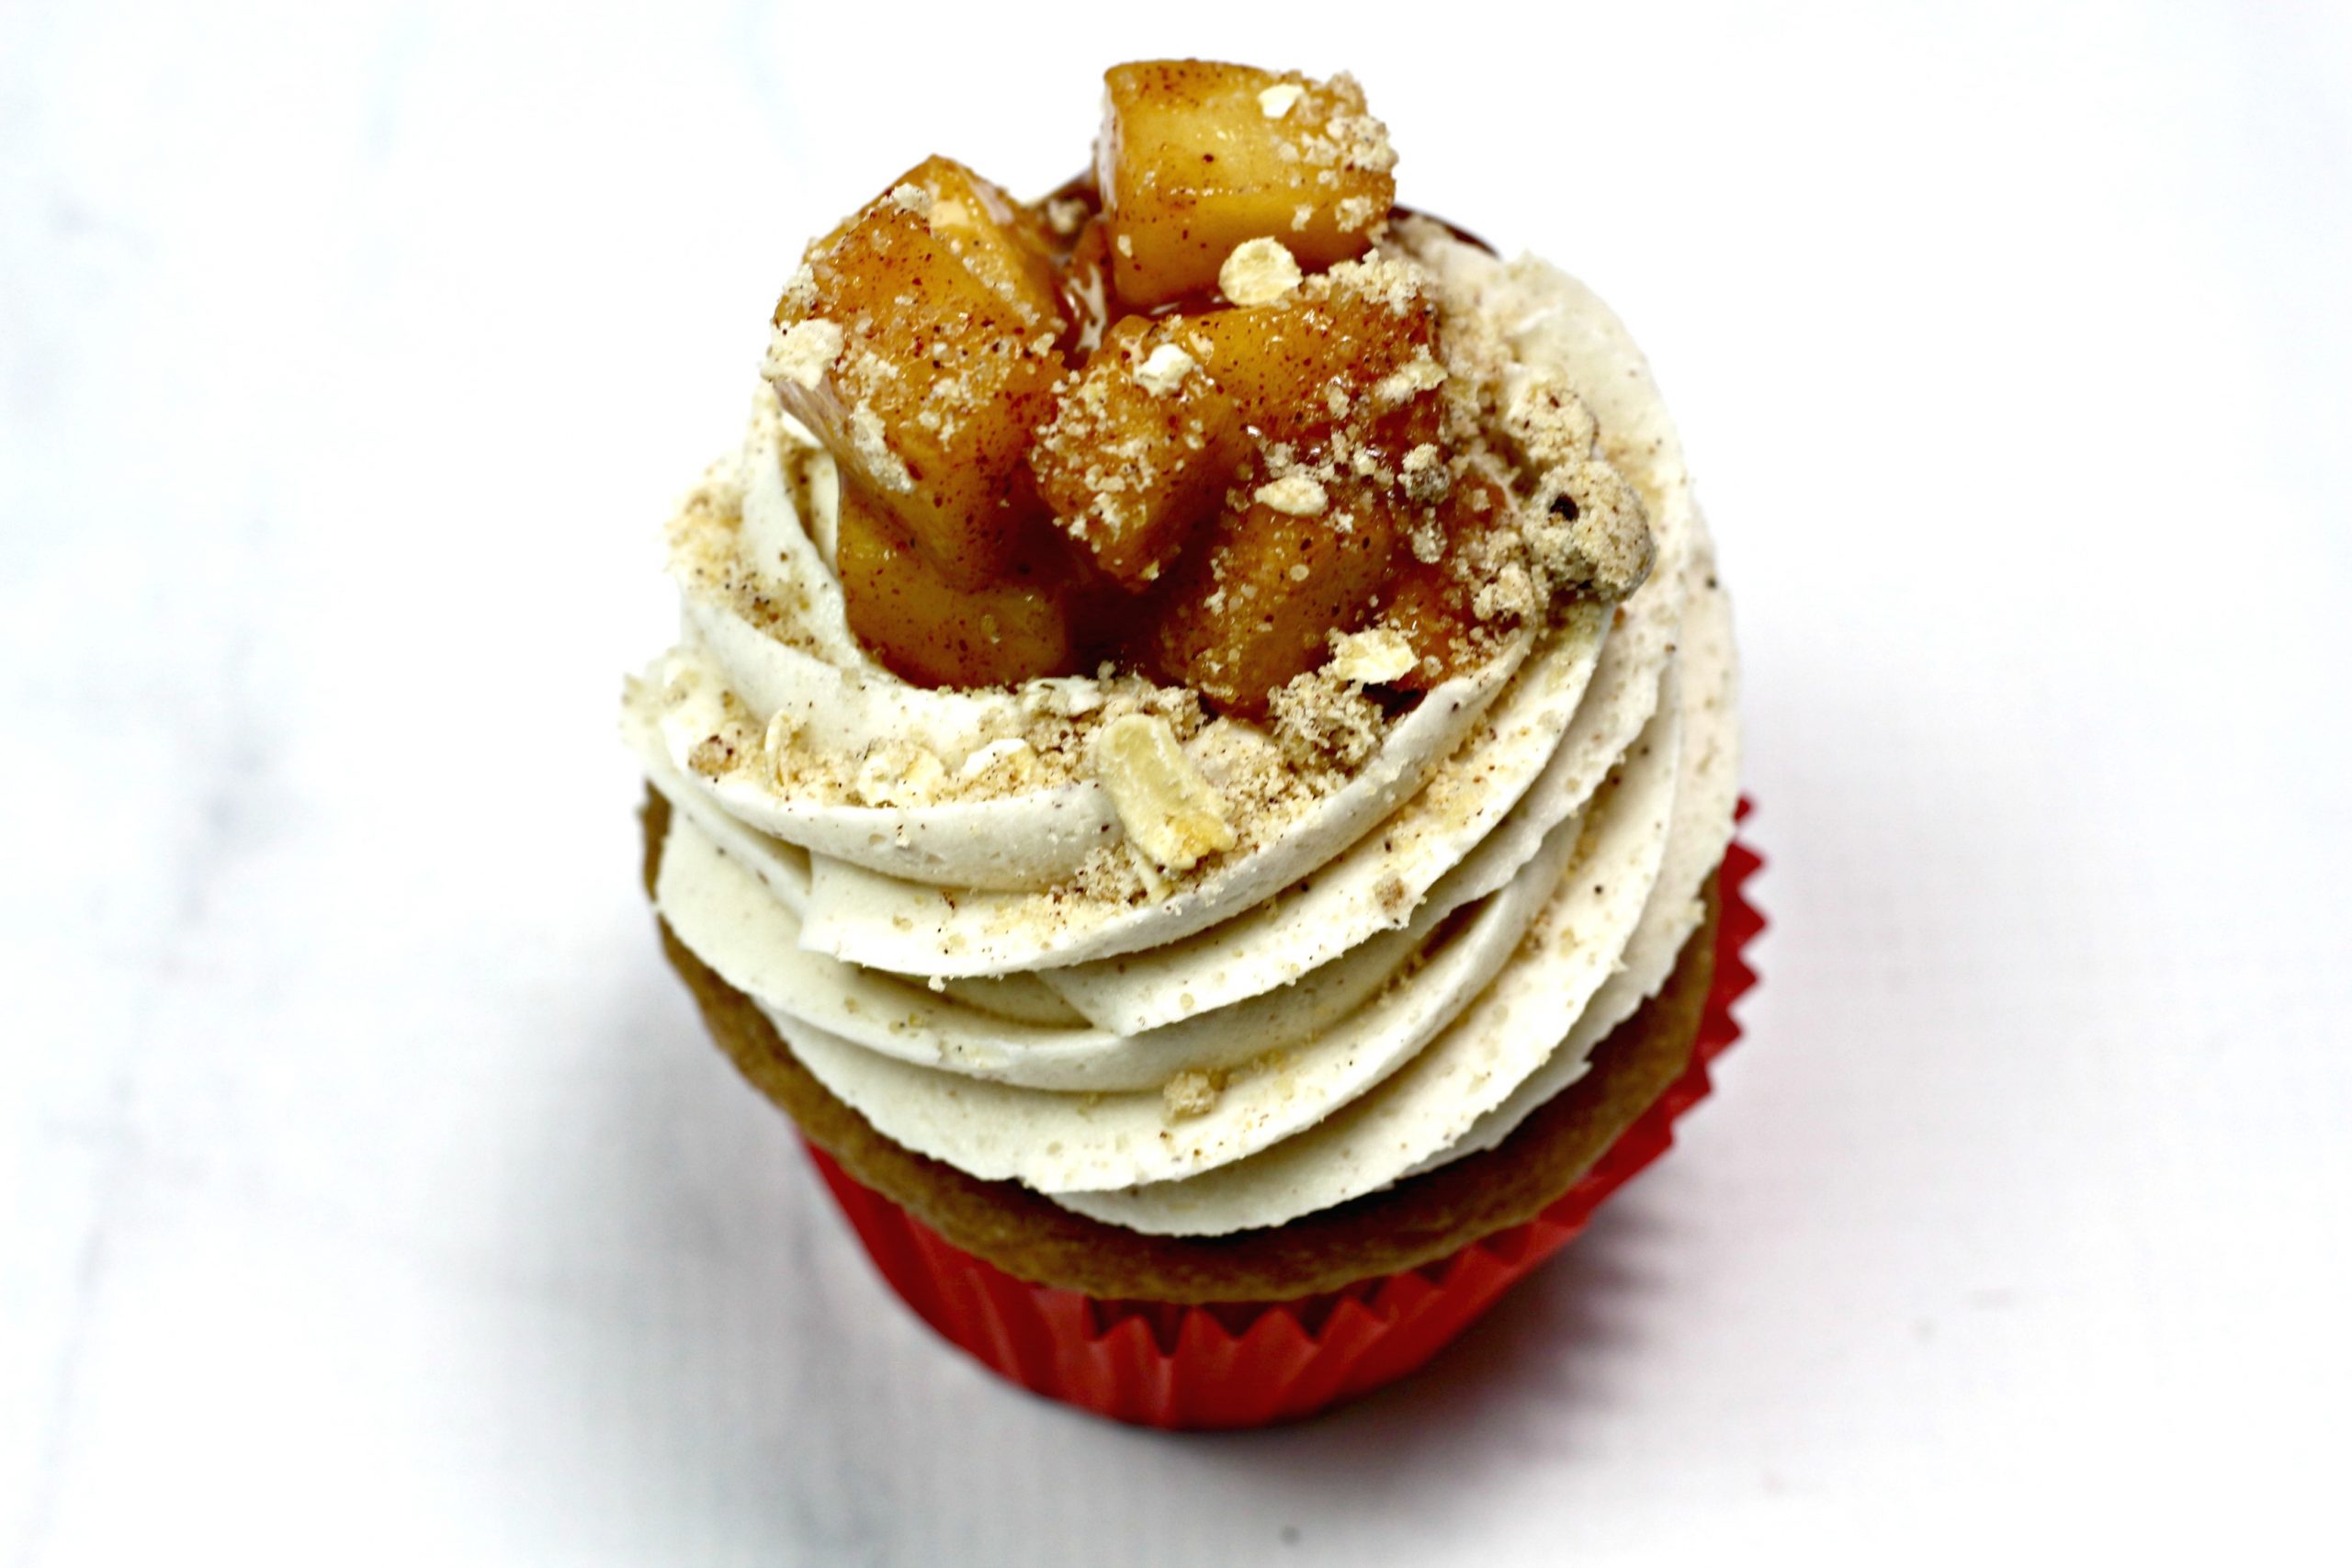 A downward view of one of the apple pie cupcakes.